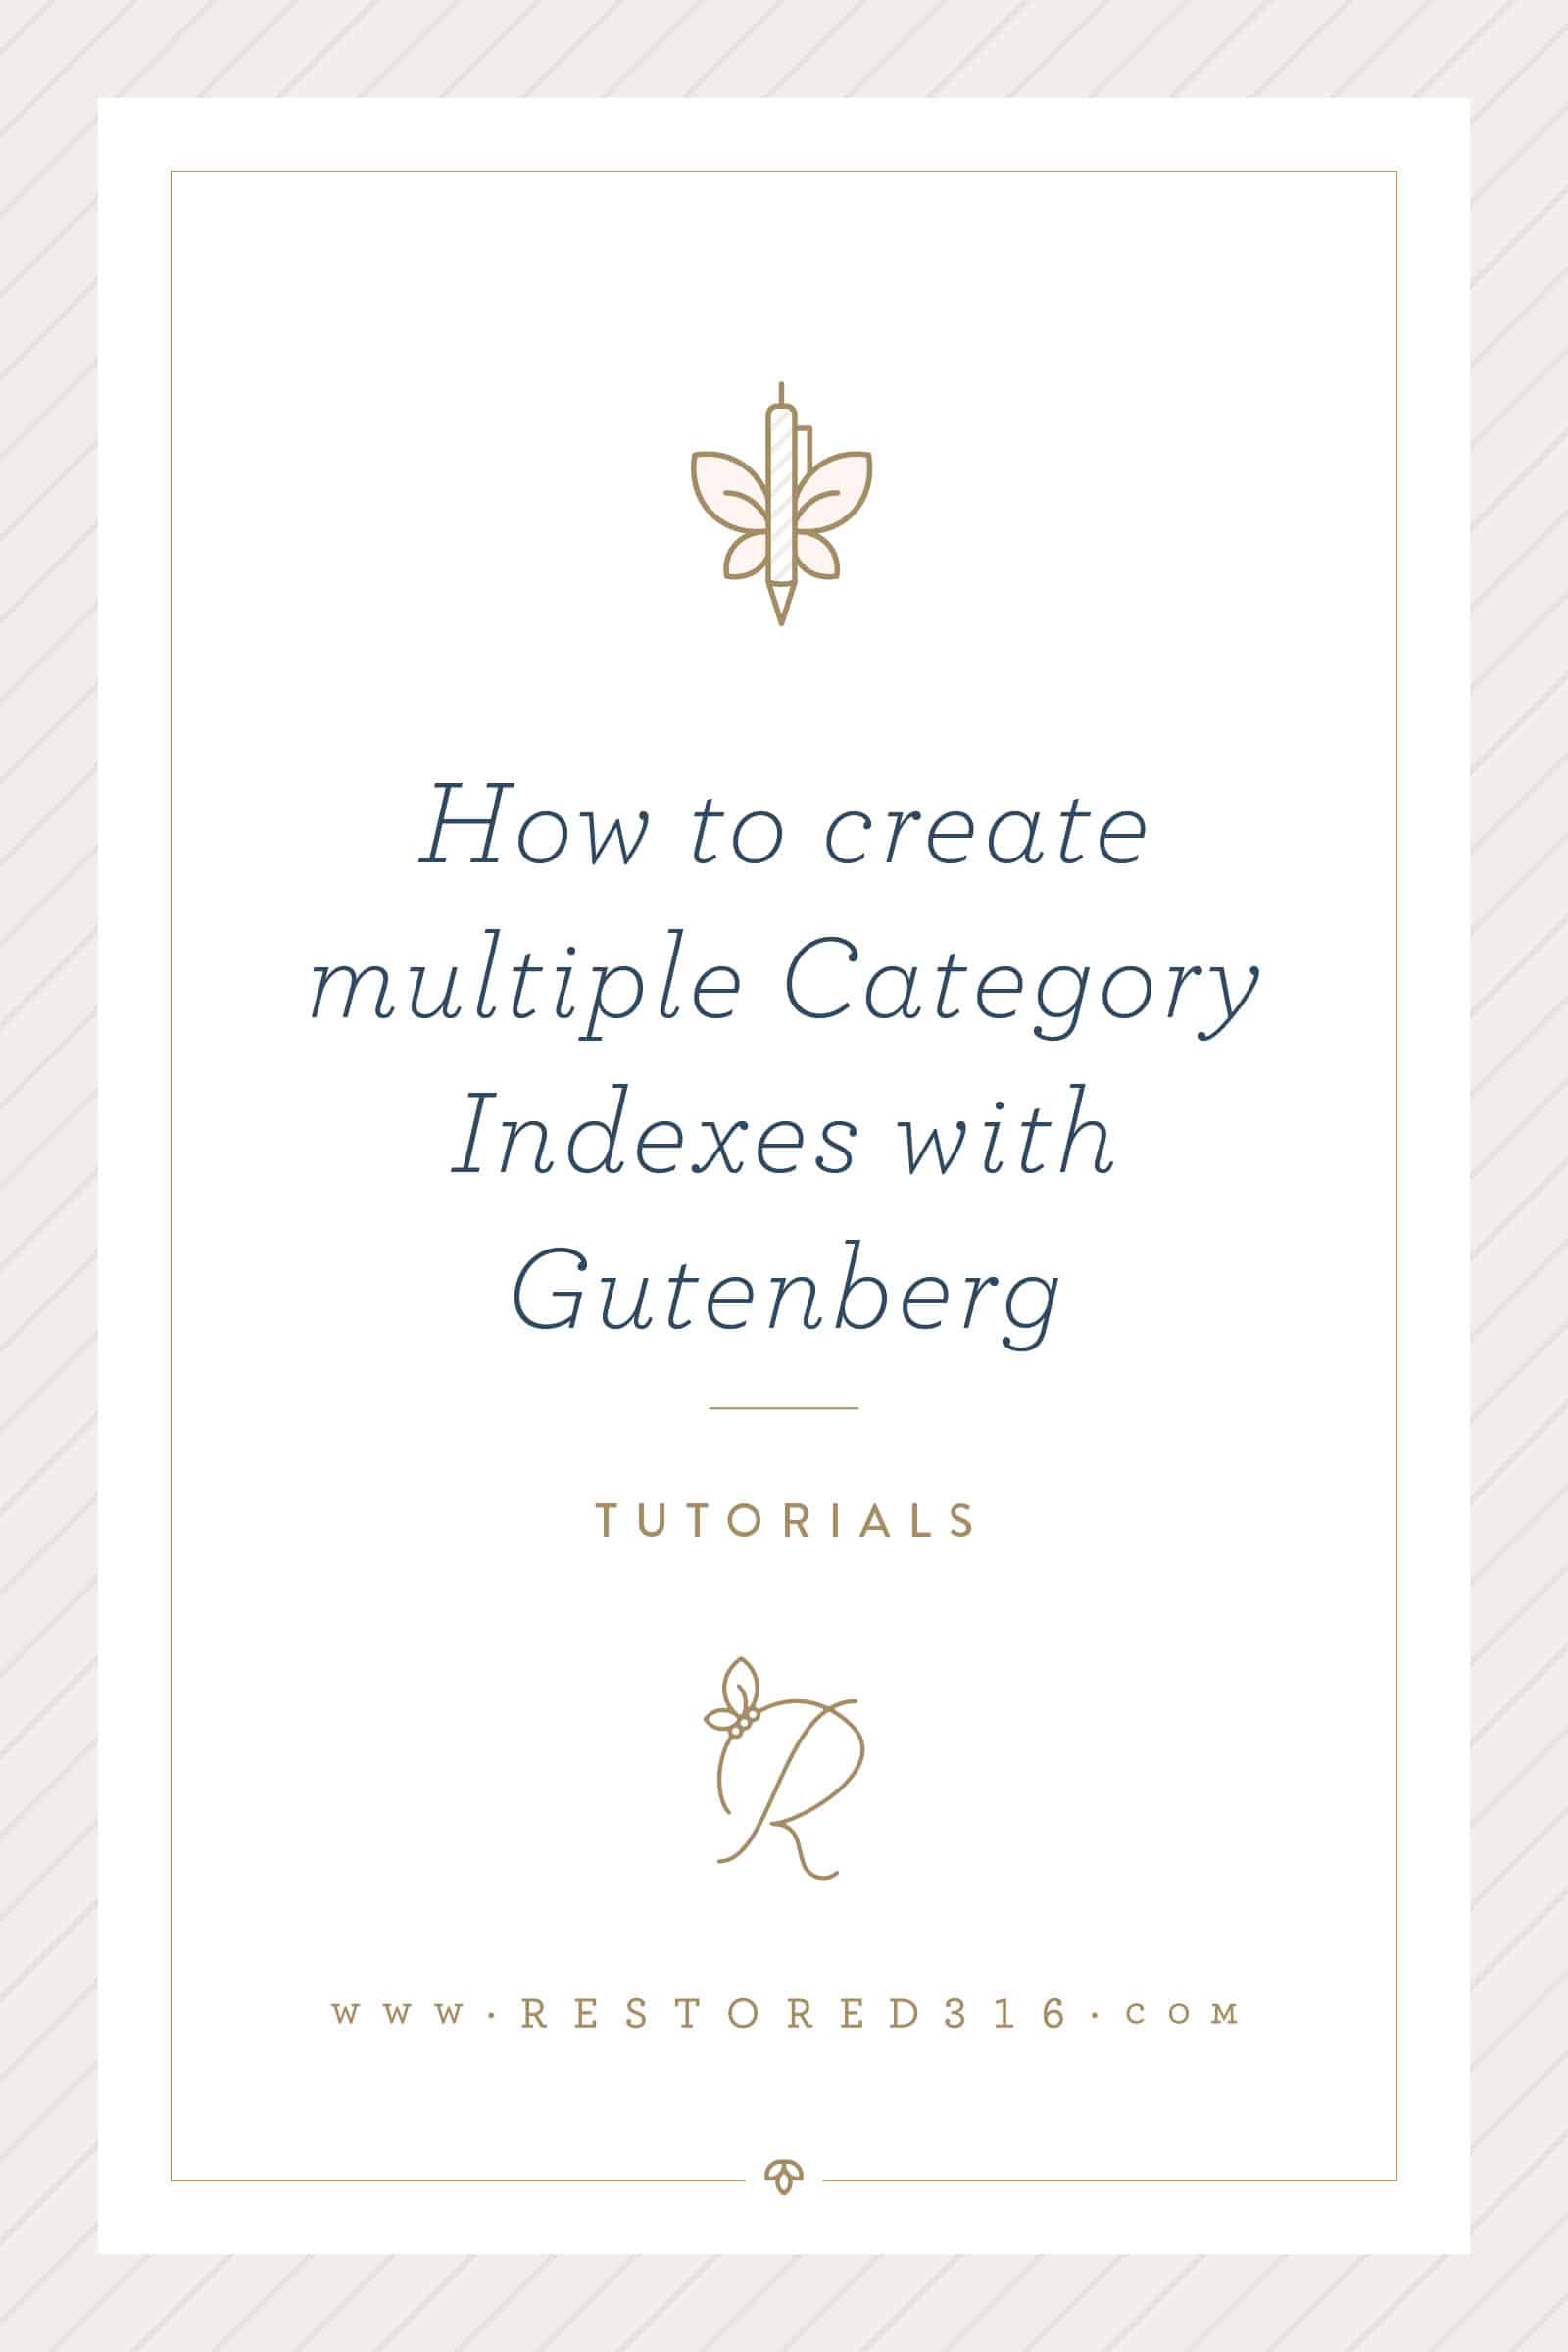 How to create multiple Category Indexes with Gutenberg